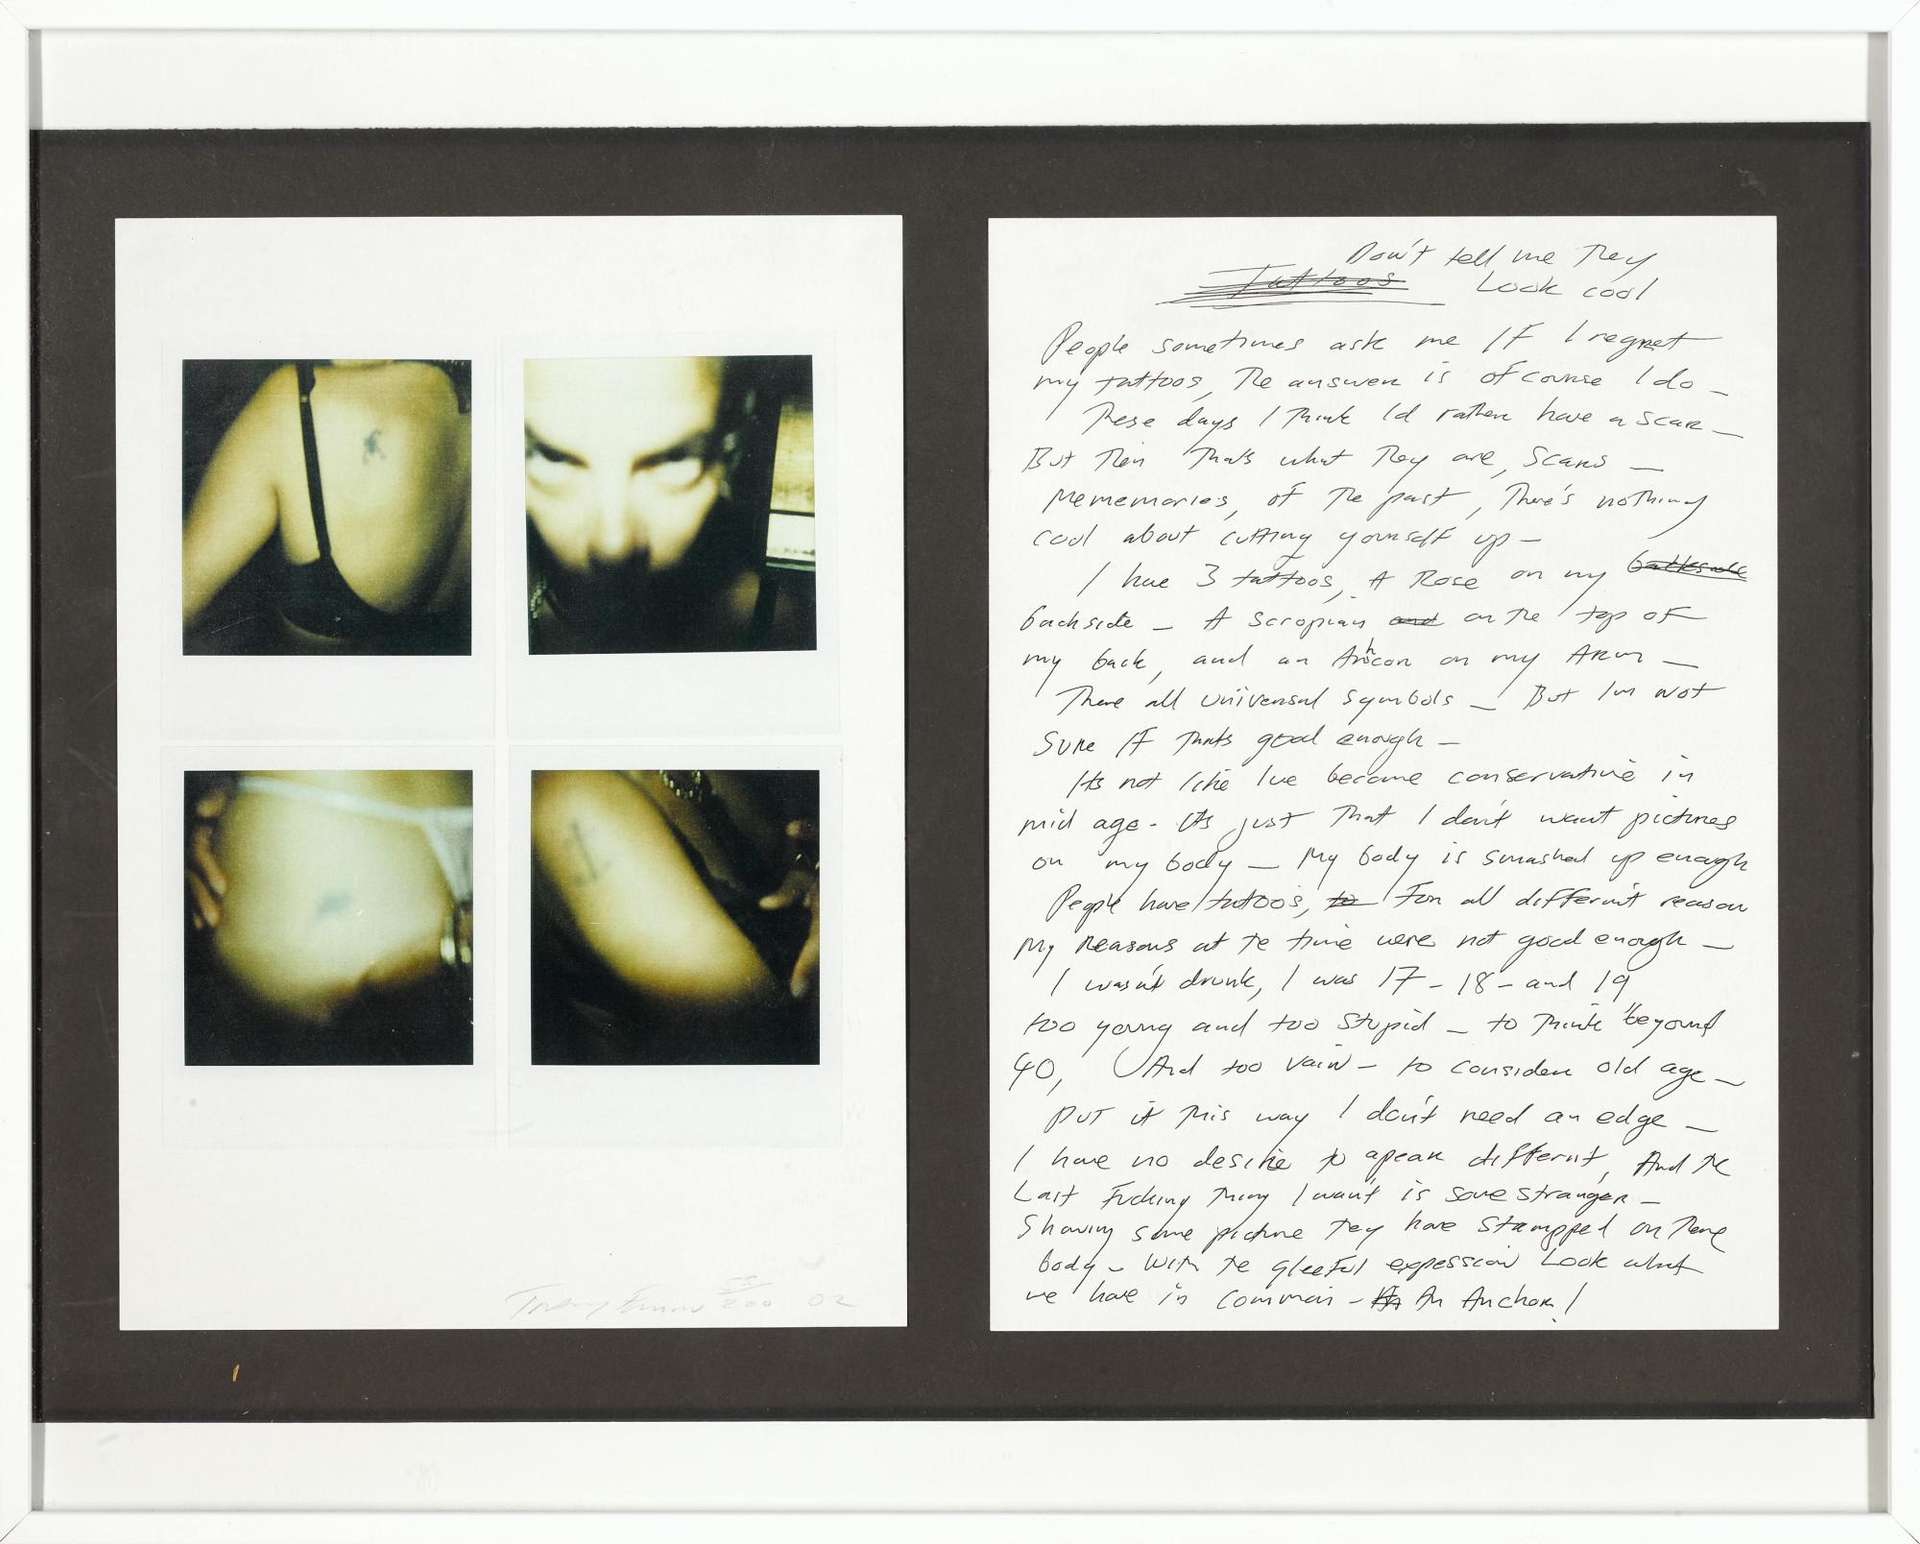 Tracey Emin’s Tattoo. A double panel work. On the left, four polaroids of close up shots of a woman’s tattoos. On the right, a note written by the artist. 